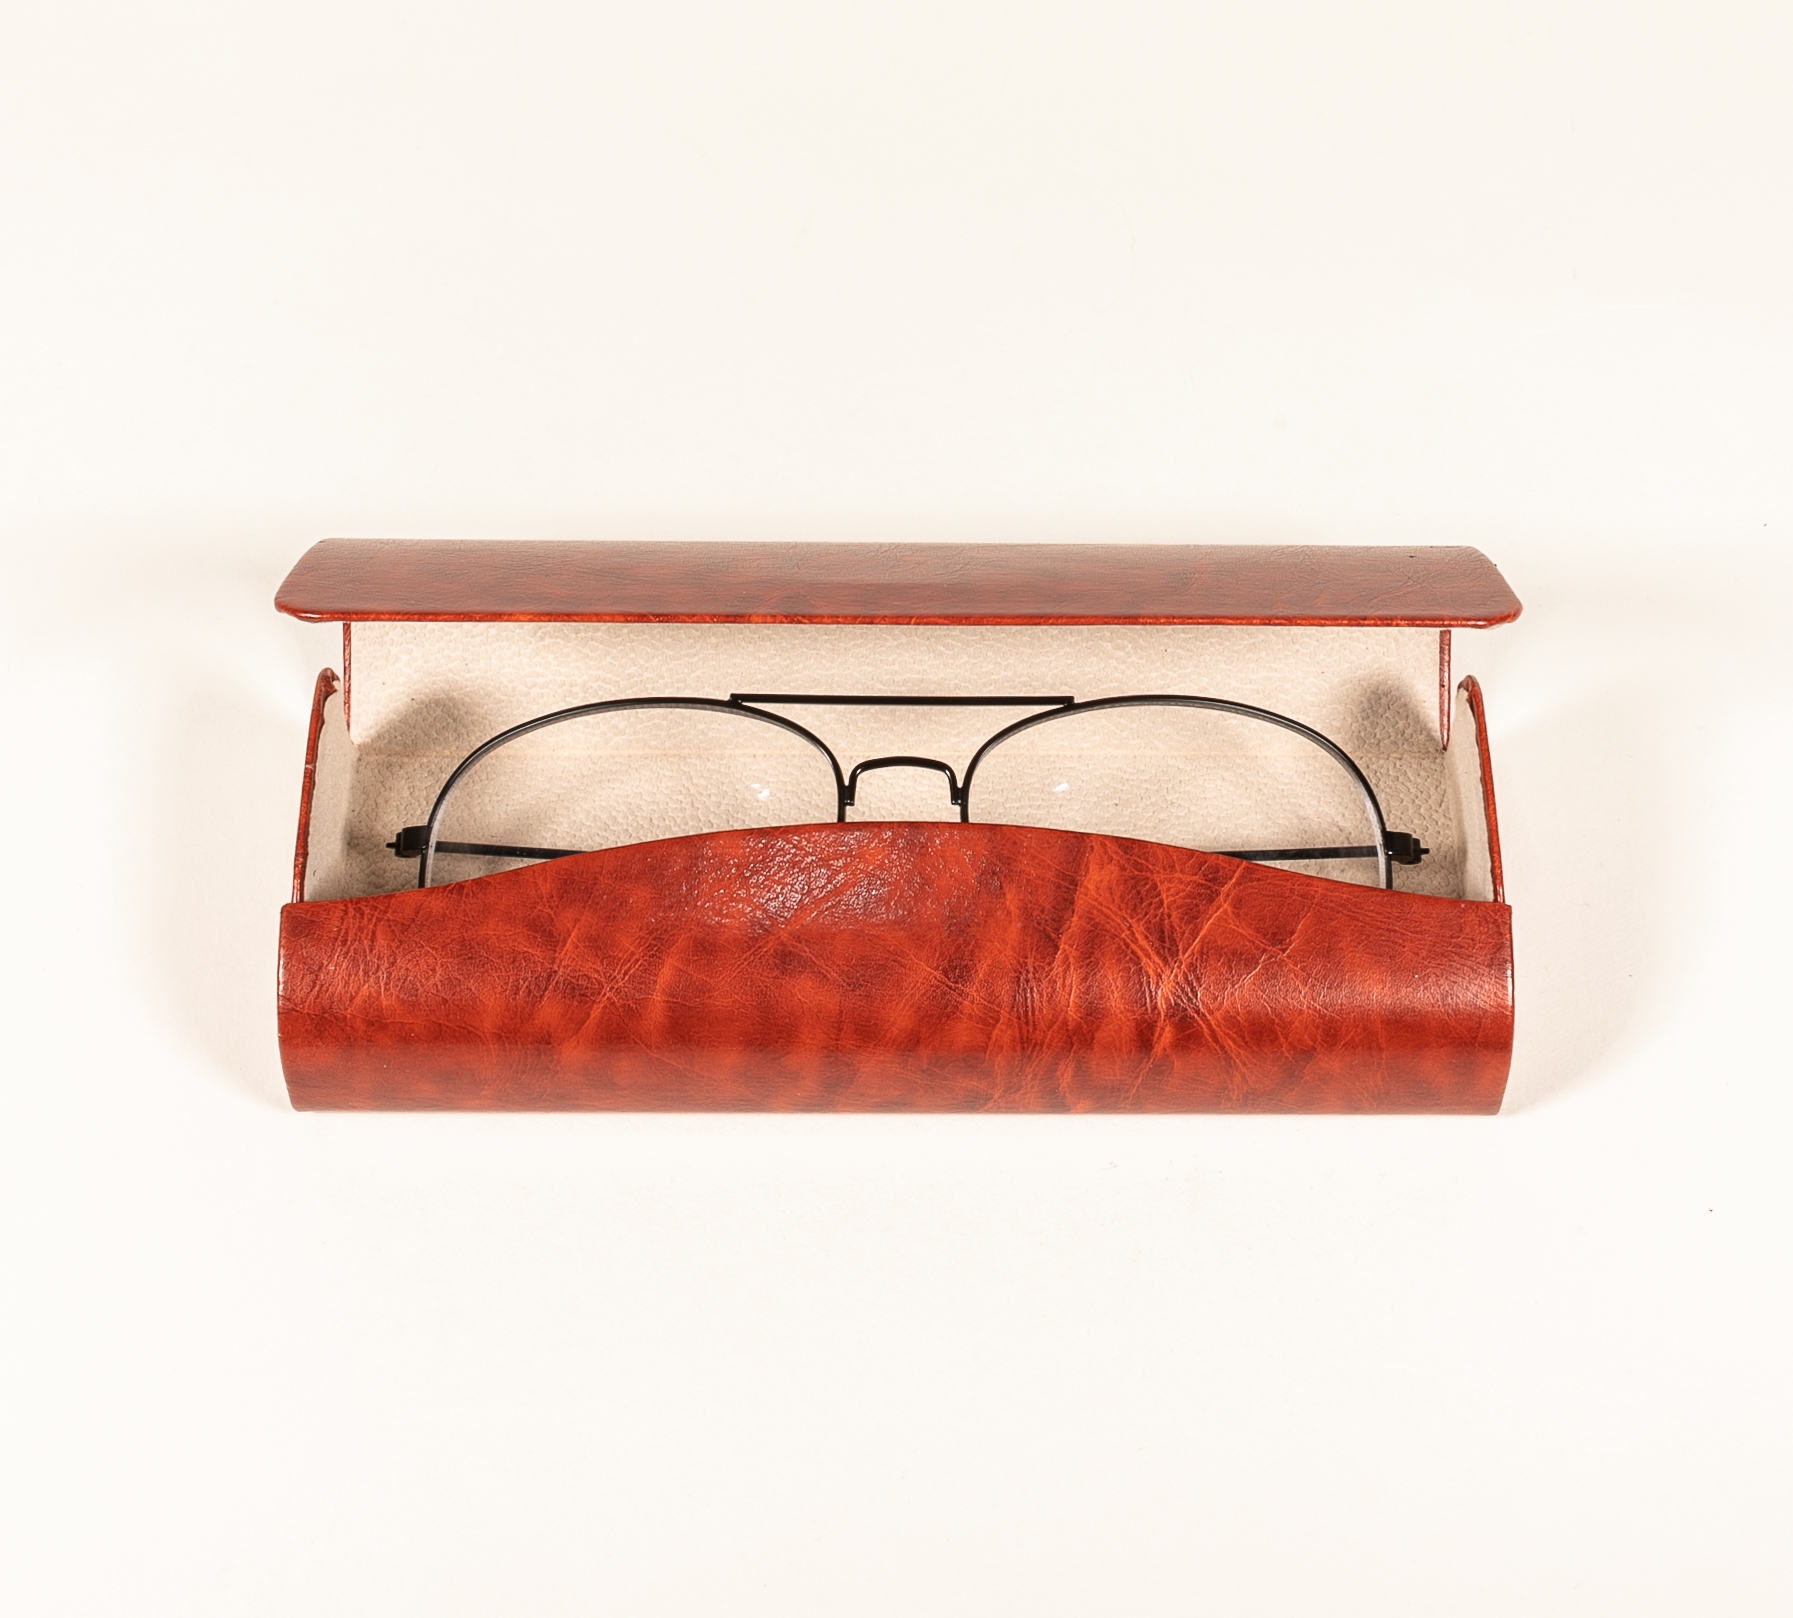 The 2021 sunglasses, a hand-made glasses case in two colors with a semicircular appearance on the side